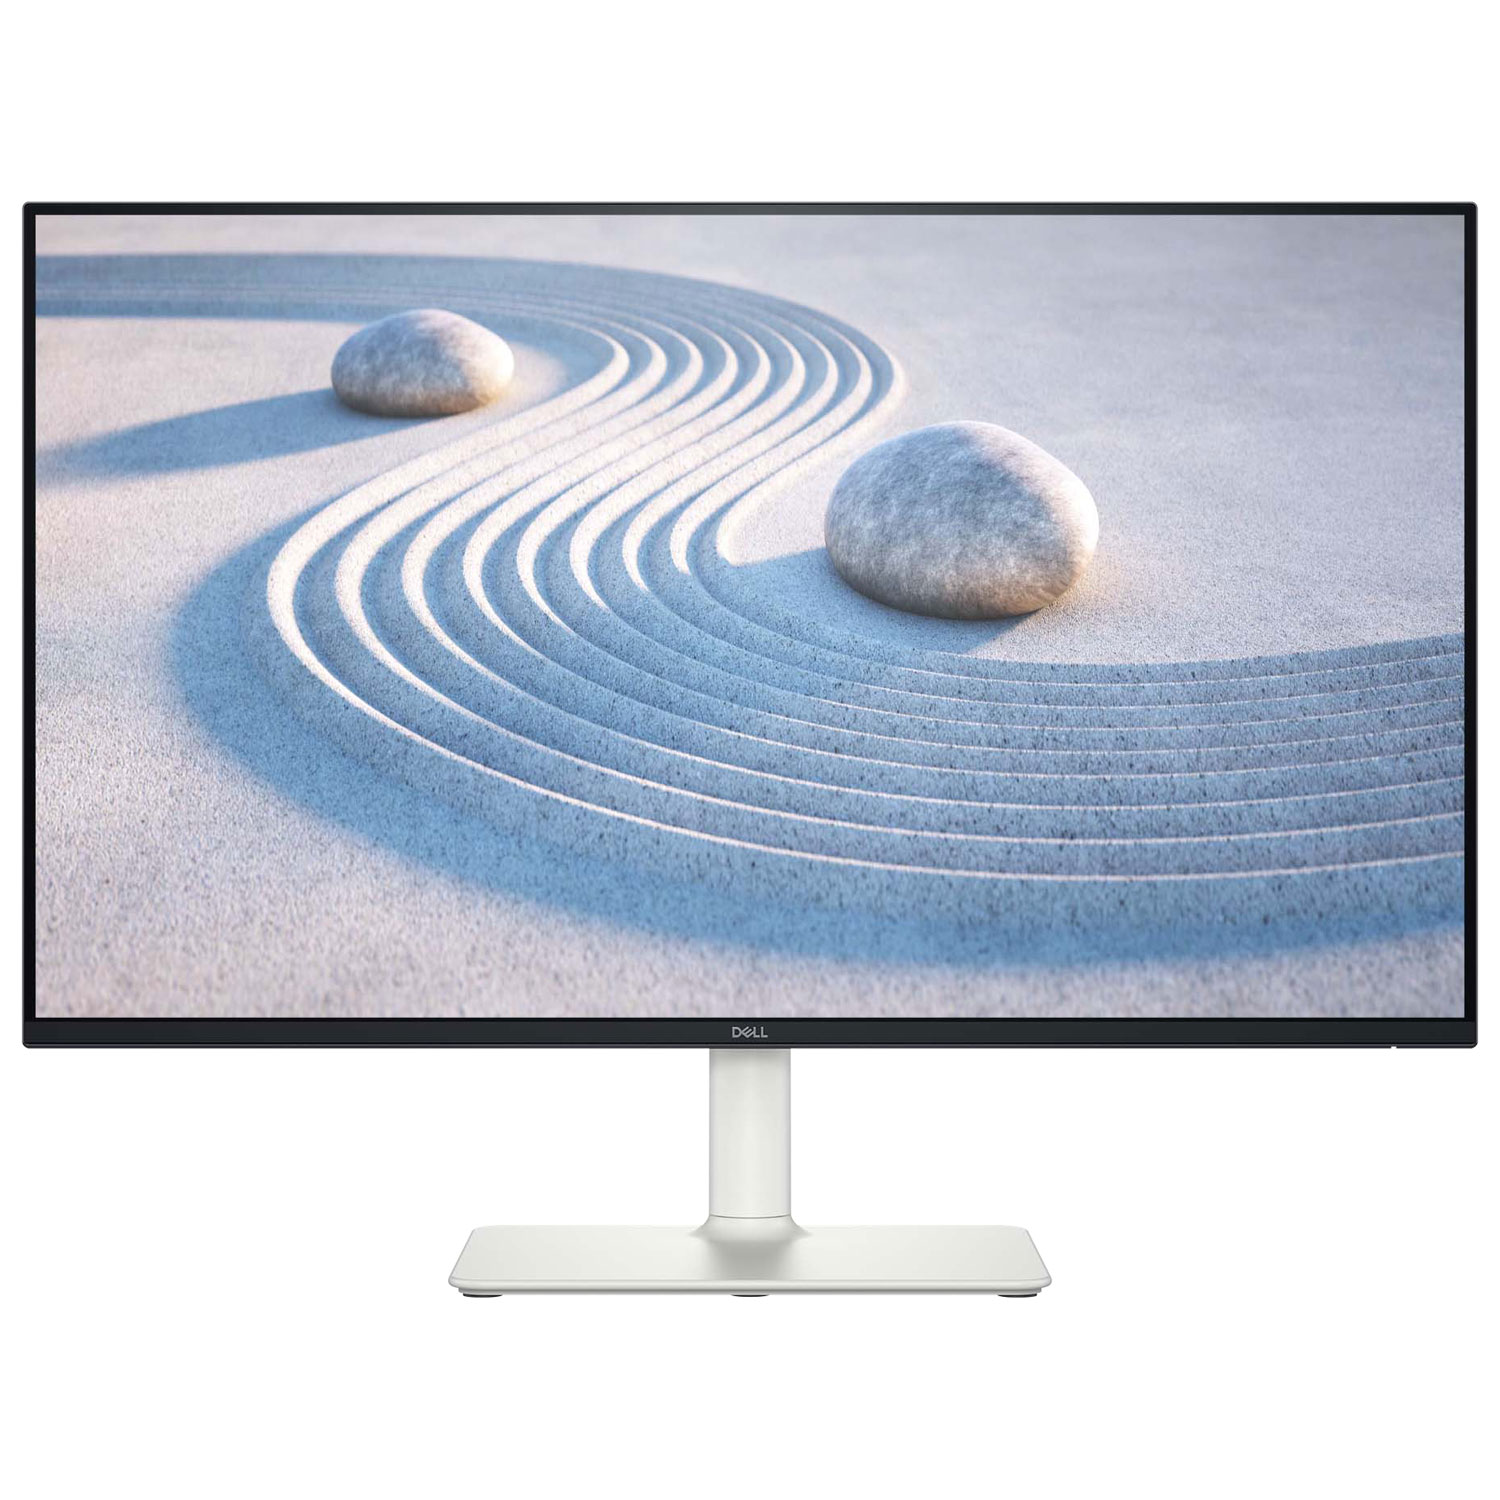 Dell 27" WQHD 100Hz 4ms IPS LED Monitor (S2725DS) - Silver